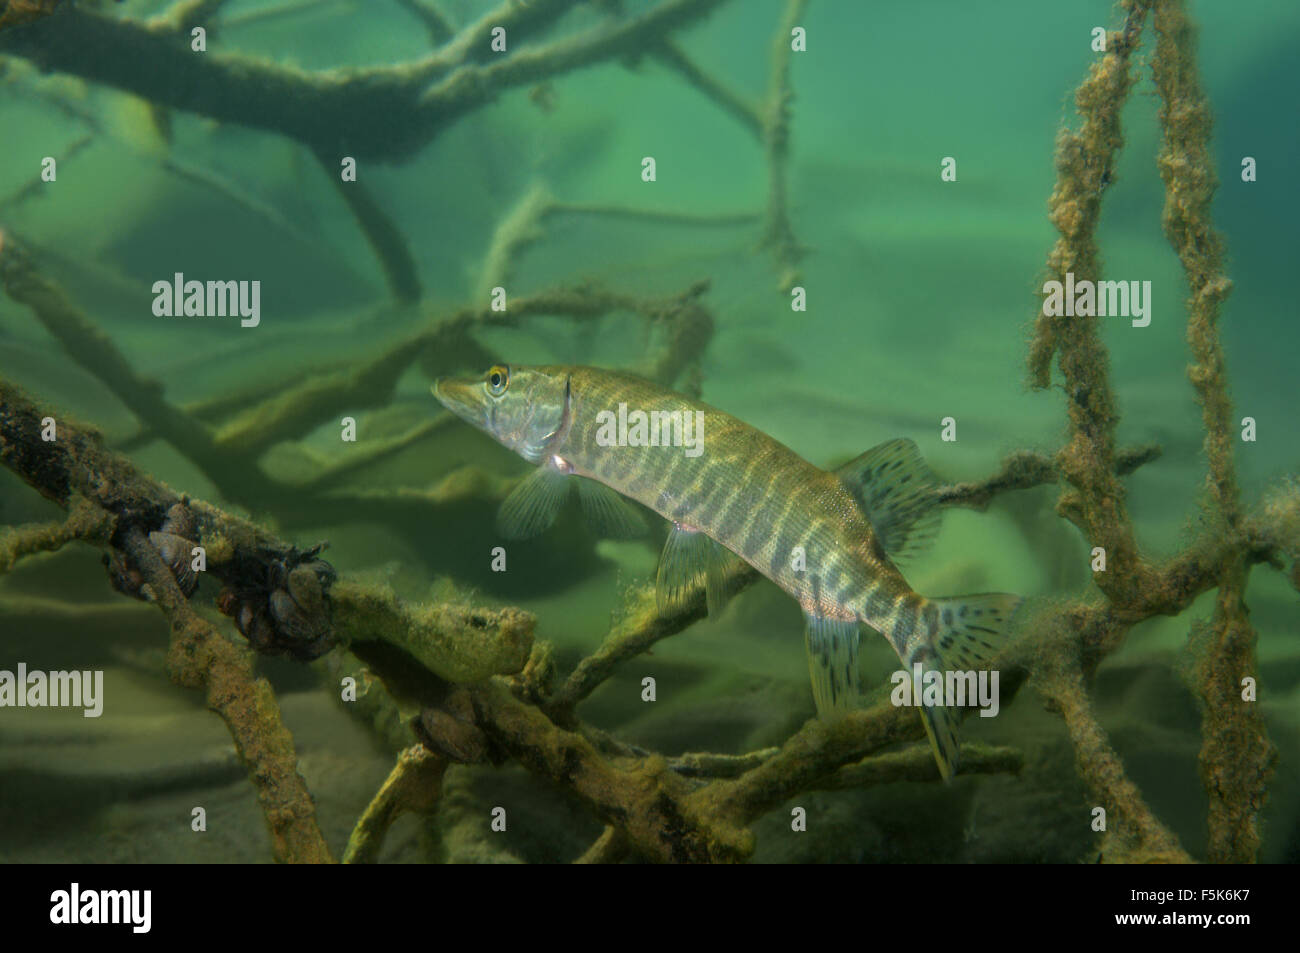 northern pike (Esox lucius) Hidden among the branches of submerged tree, granite quarry Aleksandrovskiy, Ukraine Stock Photo